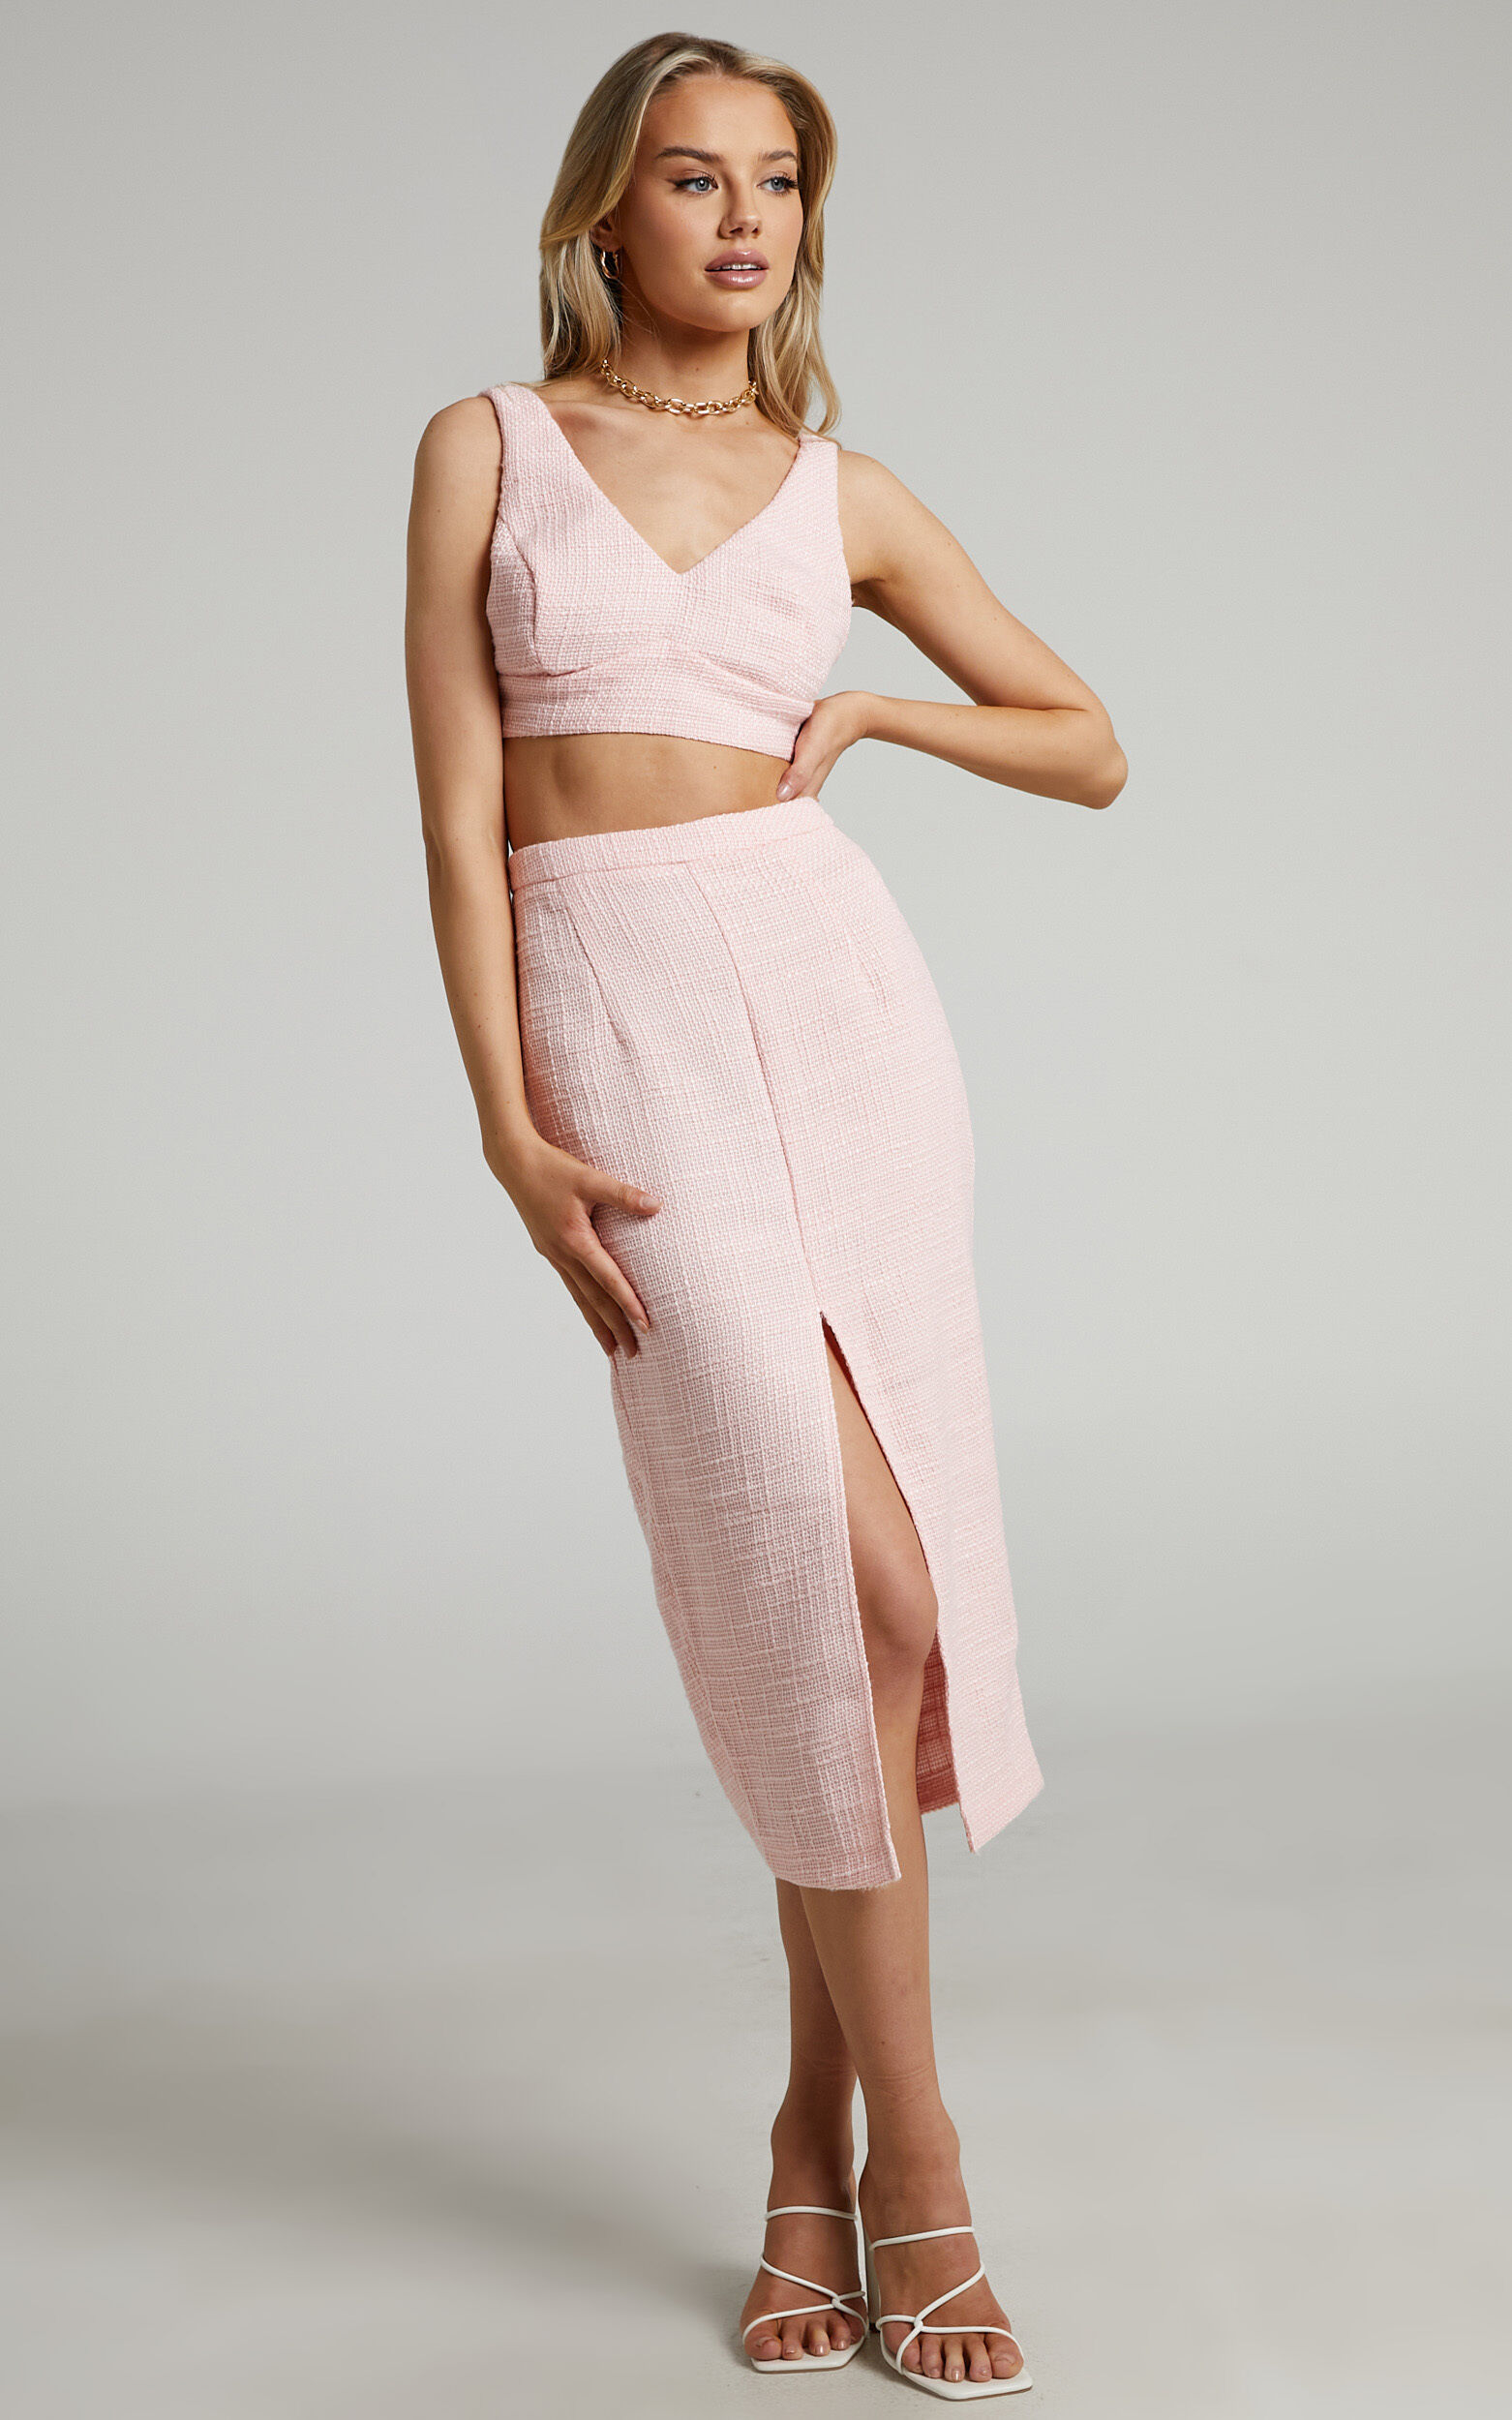 Jhessa Boucle Tweed Crop Top and Split Front Midi Skirt Two Piece Set in Pale Pink - 04, PNK1, super-hi-res image number null